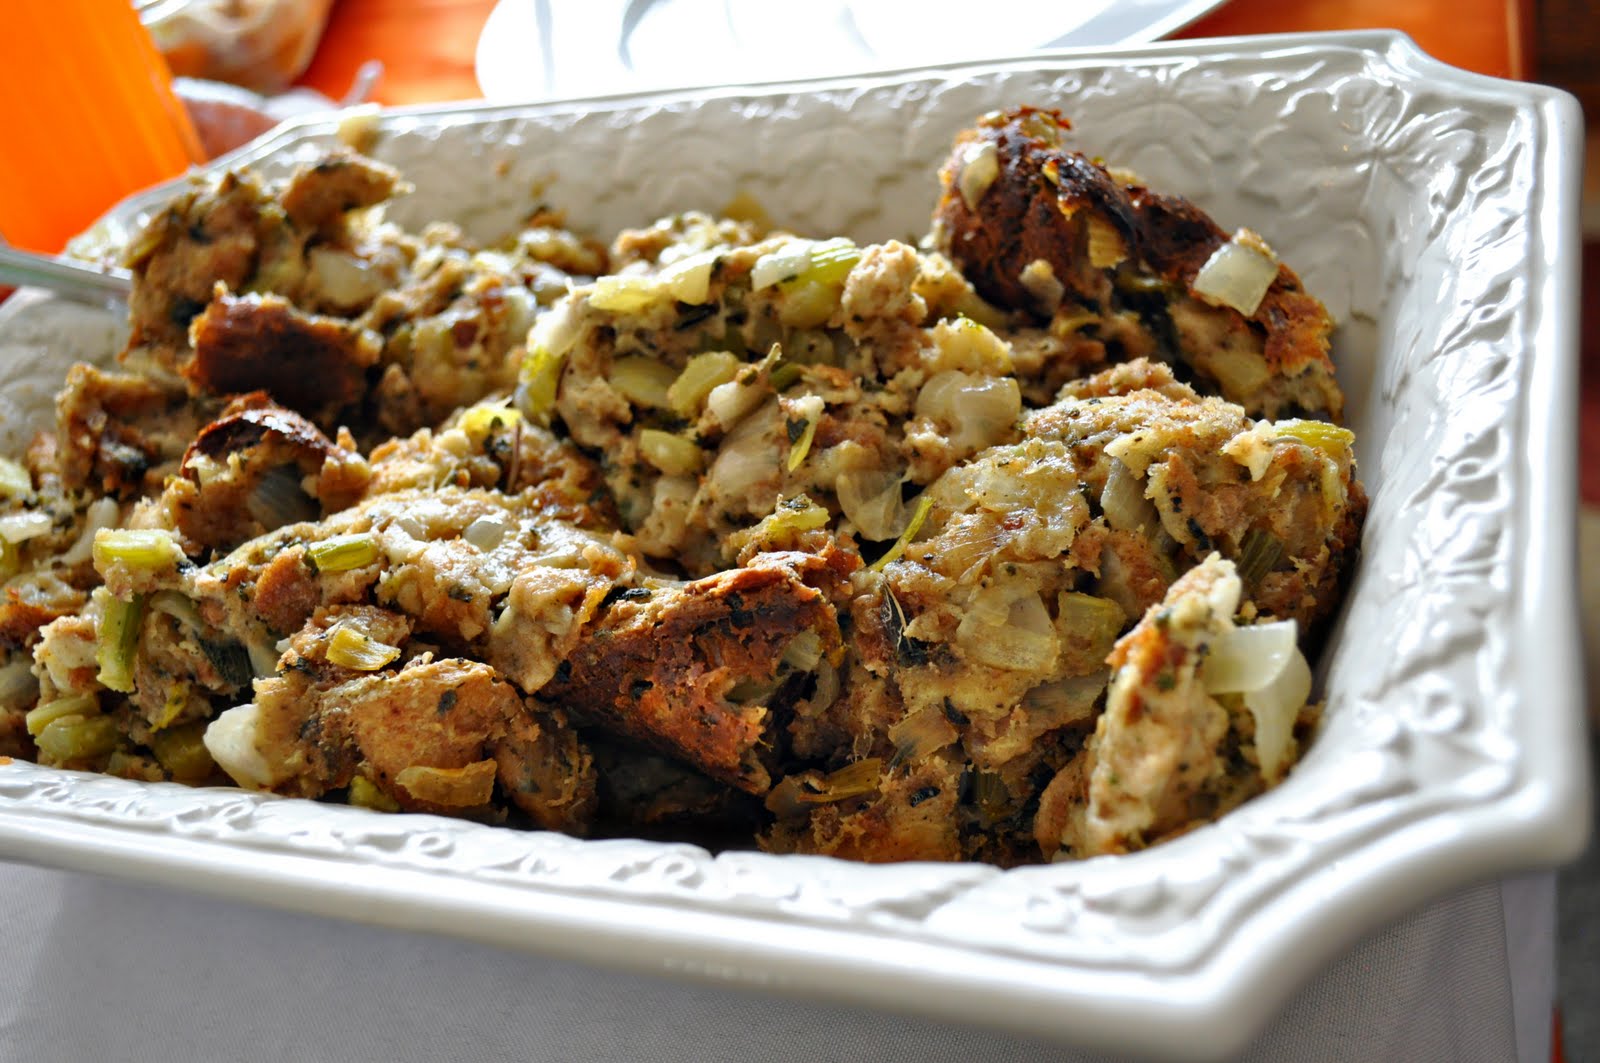 My Favorite Meals: Thanksgiving Stuffing